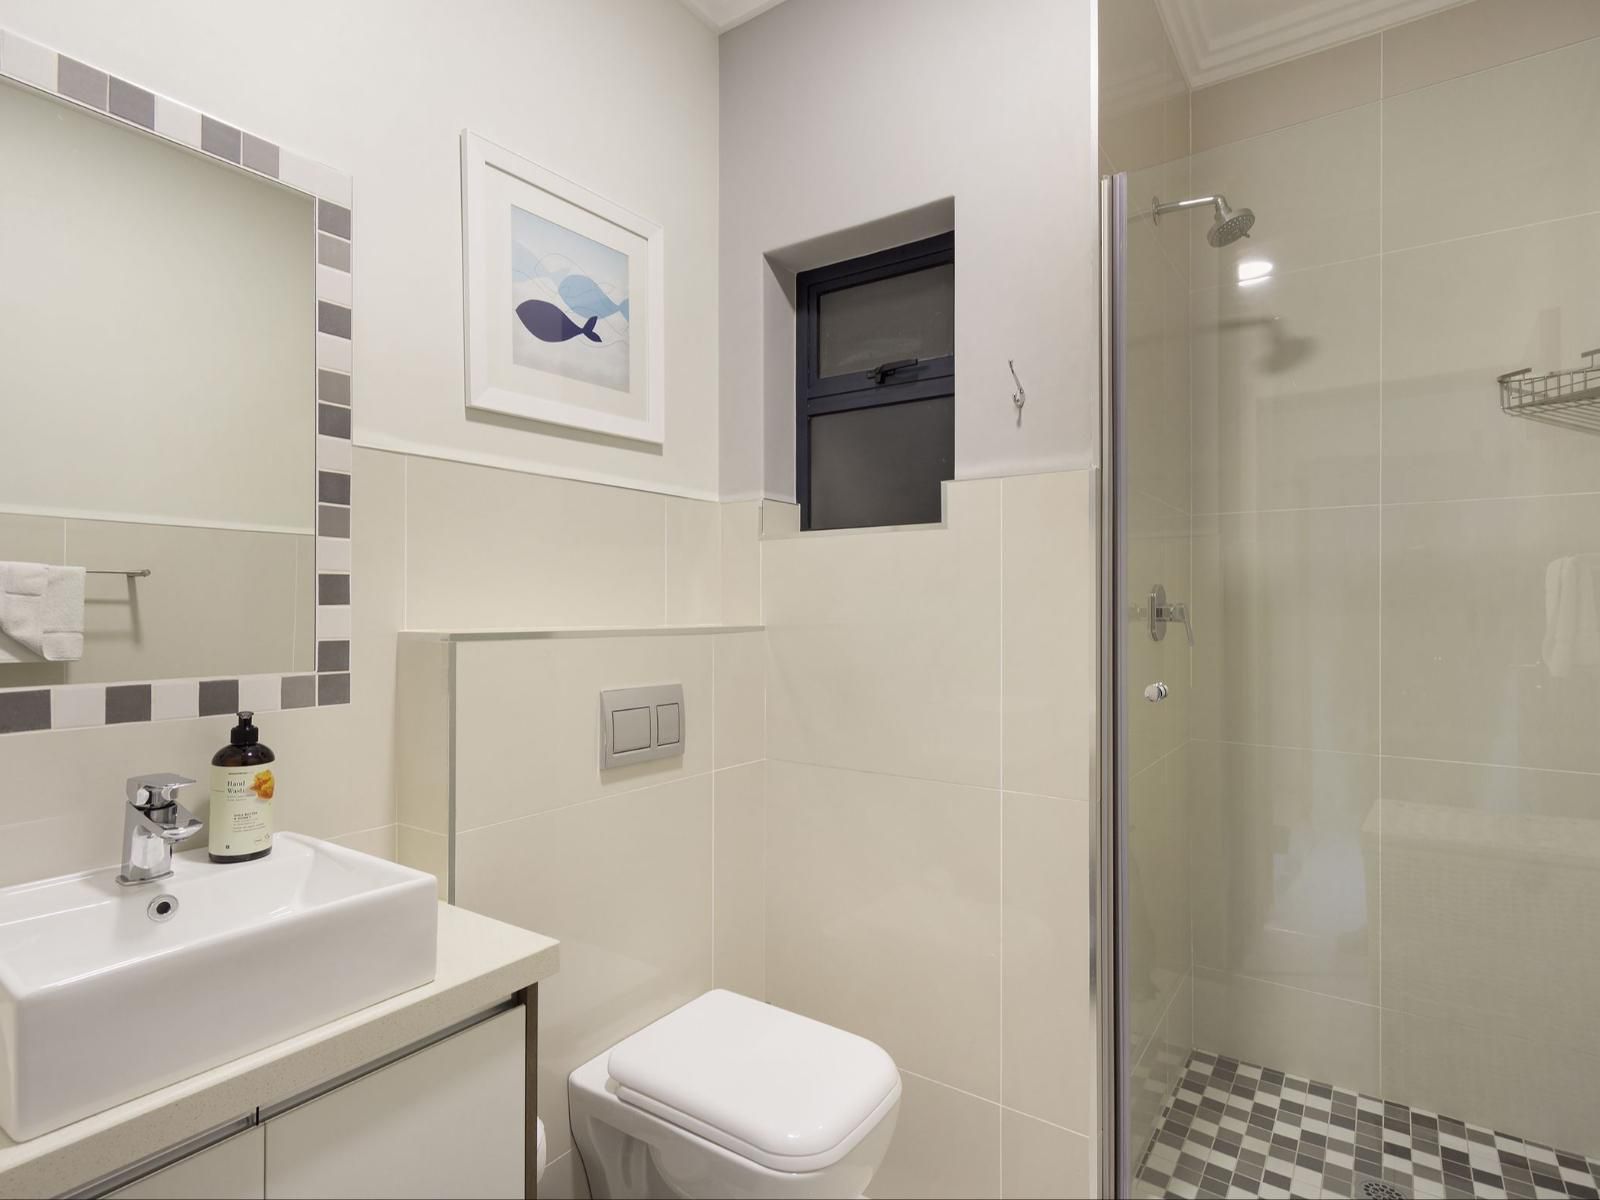 Villa D Luca 4 By Hostagents Blouberg Cape Town Western Cape South Africa Unsaturated, Bathroom